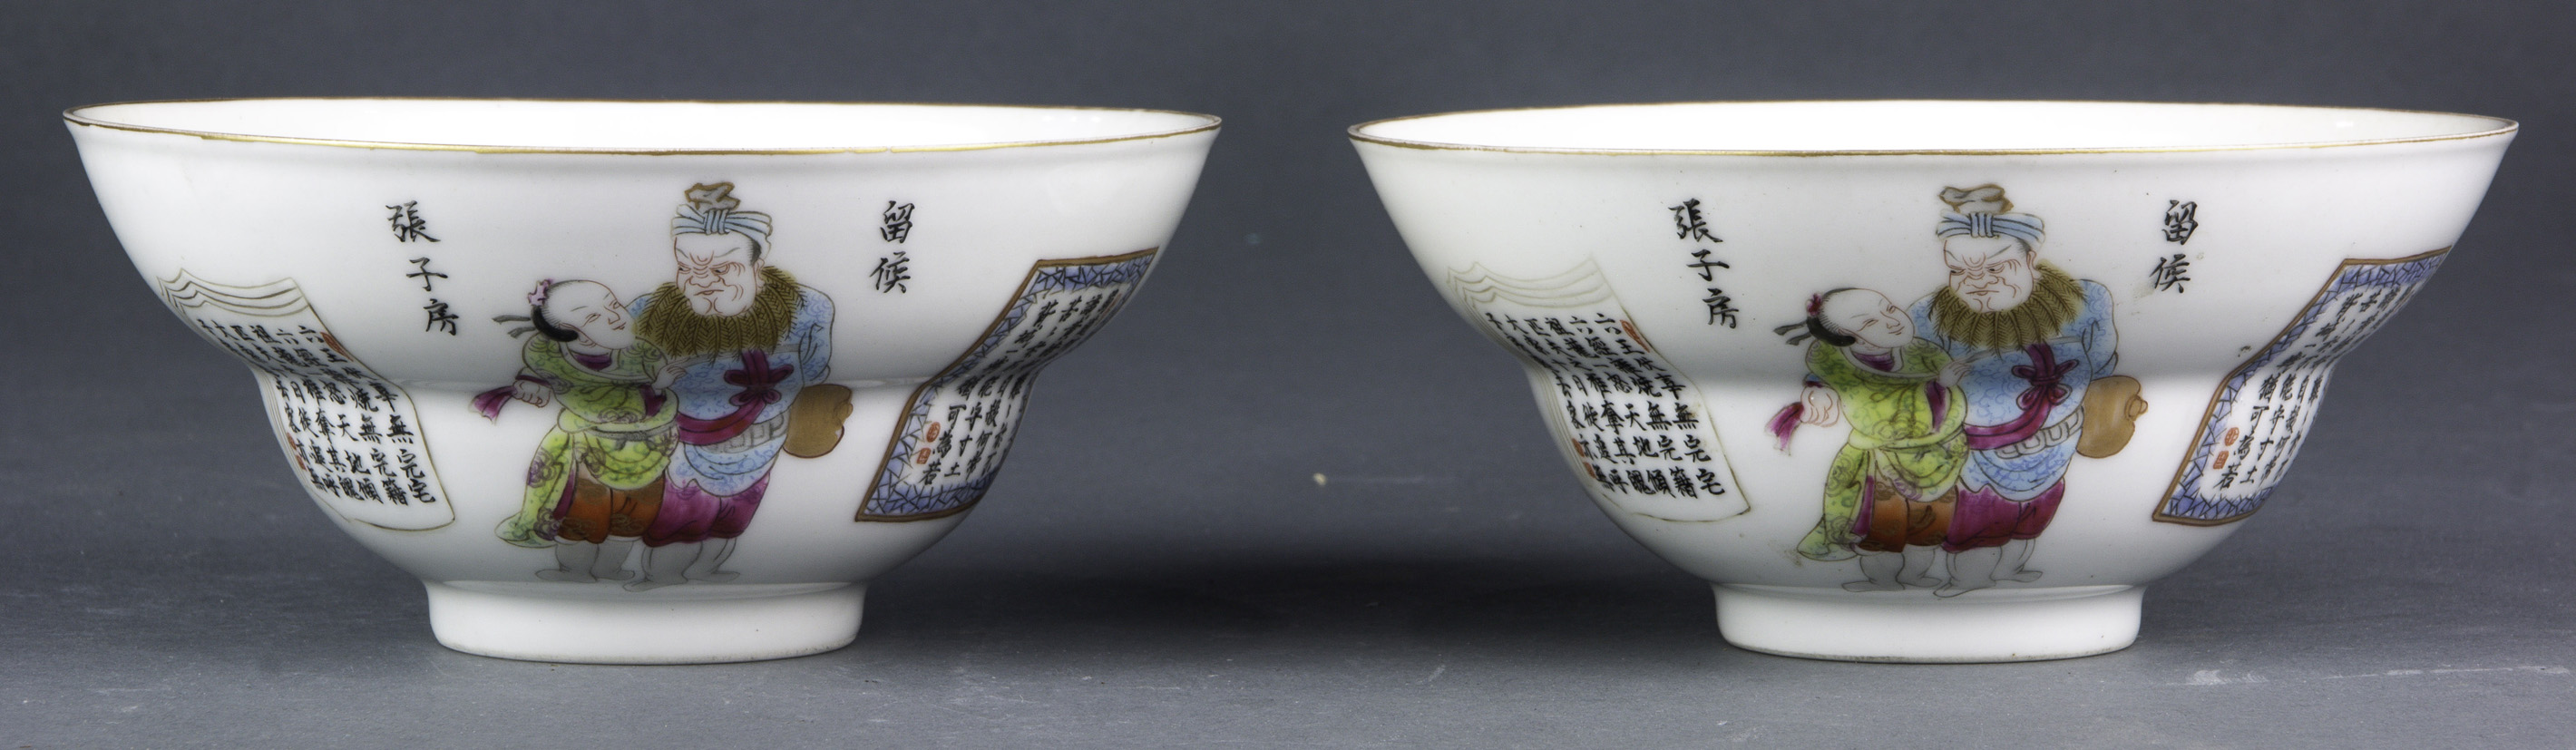 PAIR OF CHINESE FAMILLE ROSE BOWLS 3a4980